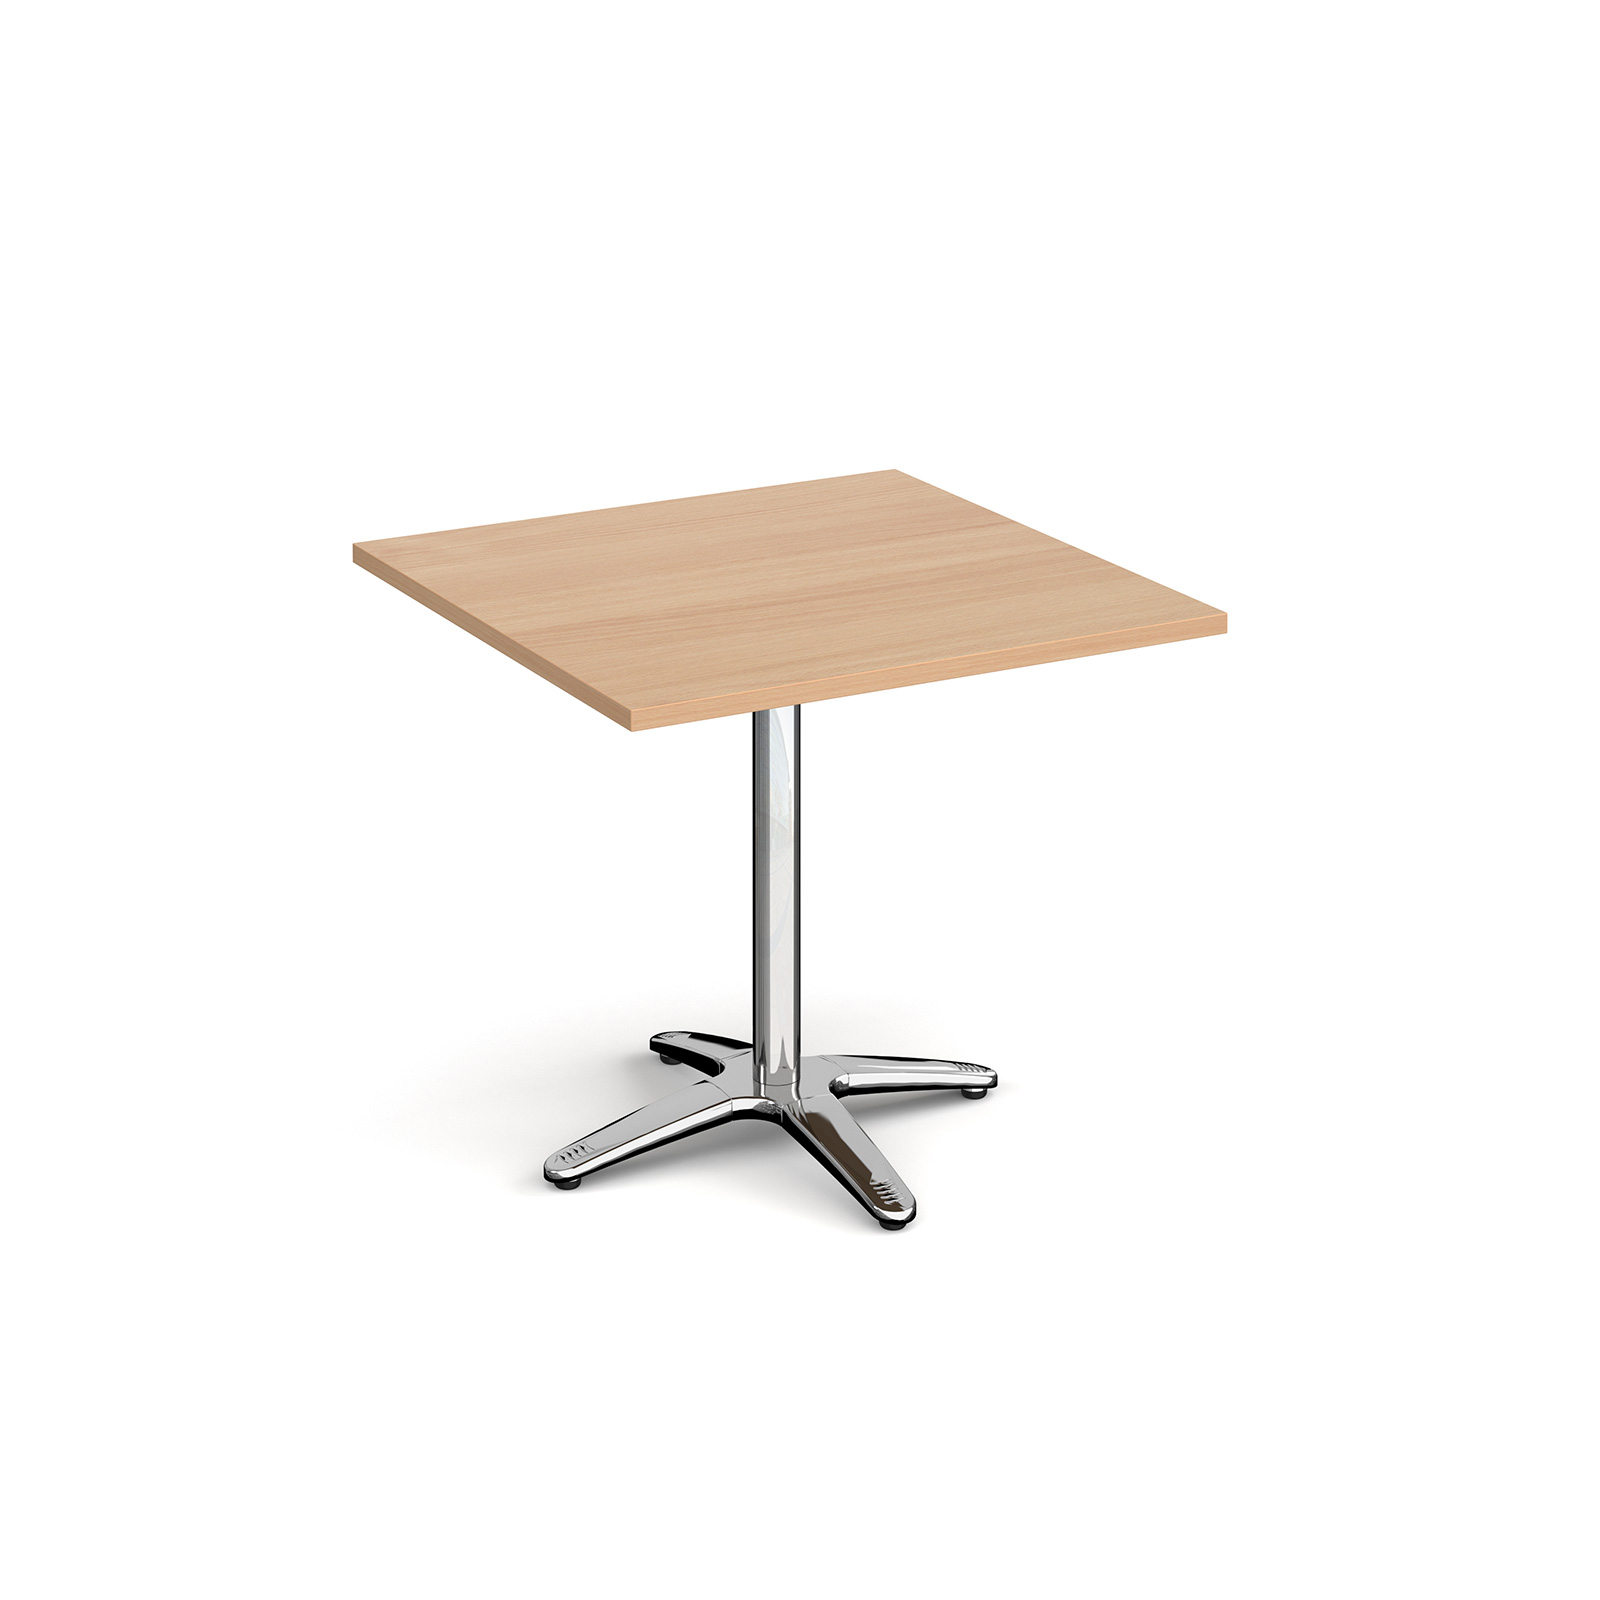 Roma square dining table with 4 leg chrome base 800mm - beech